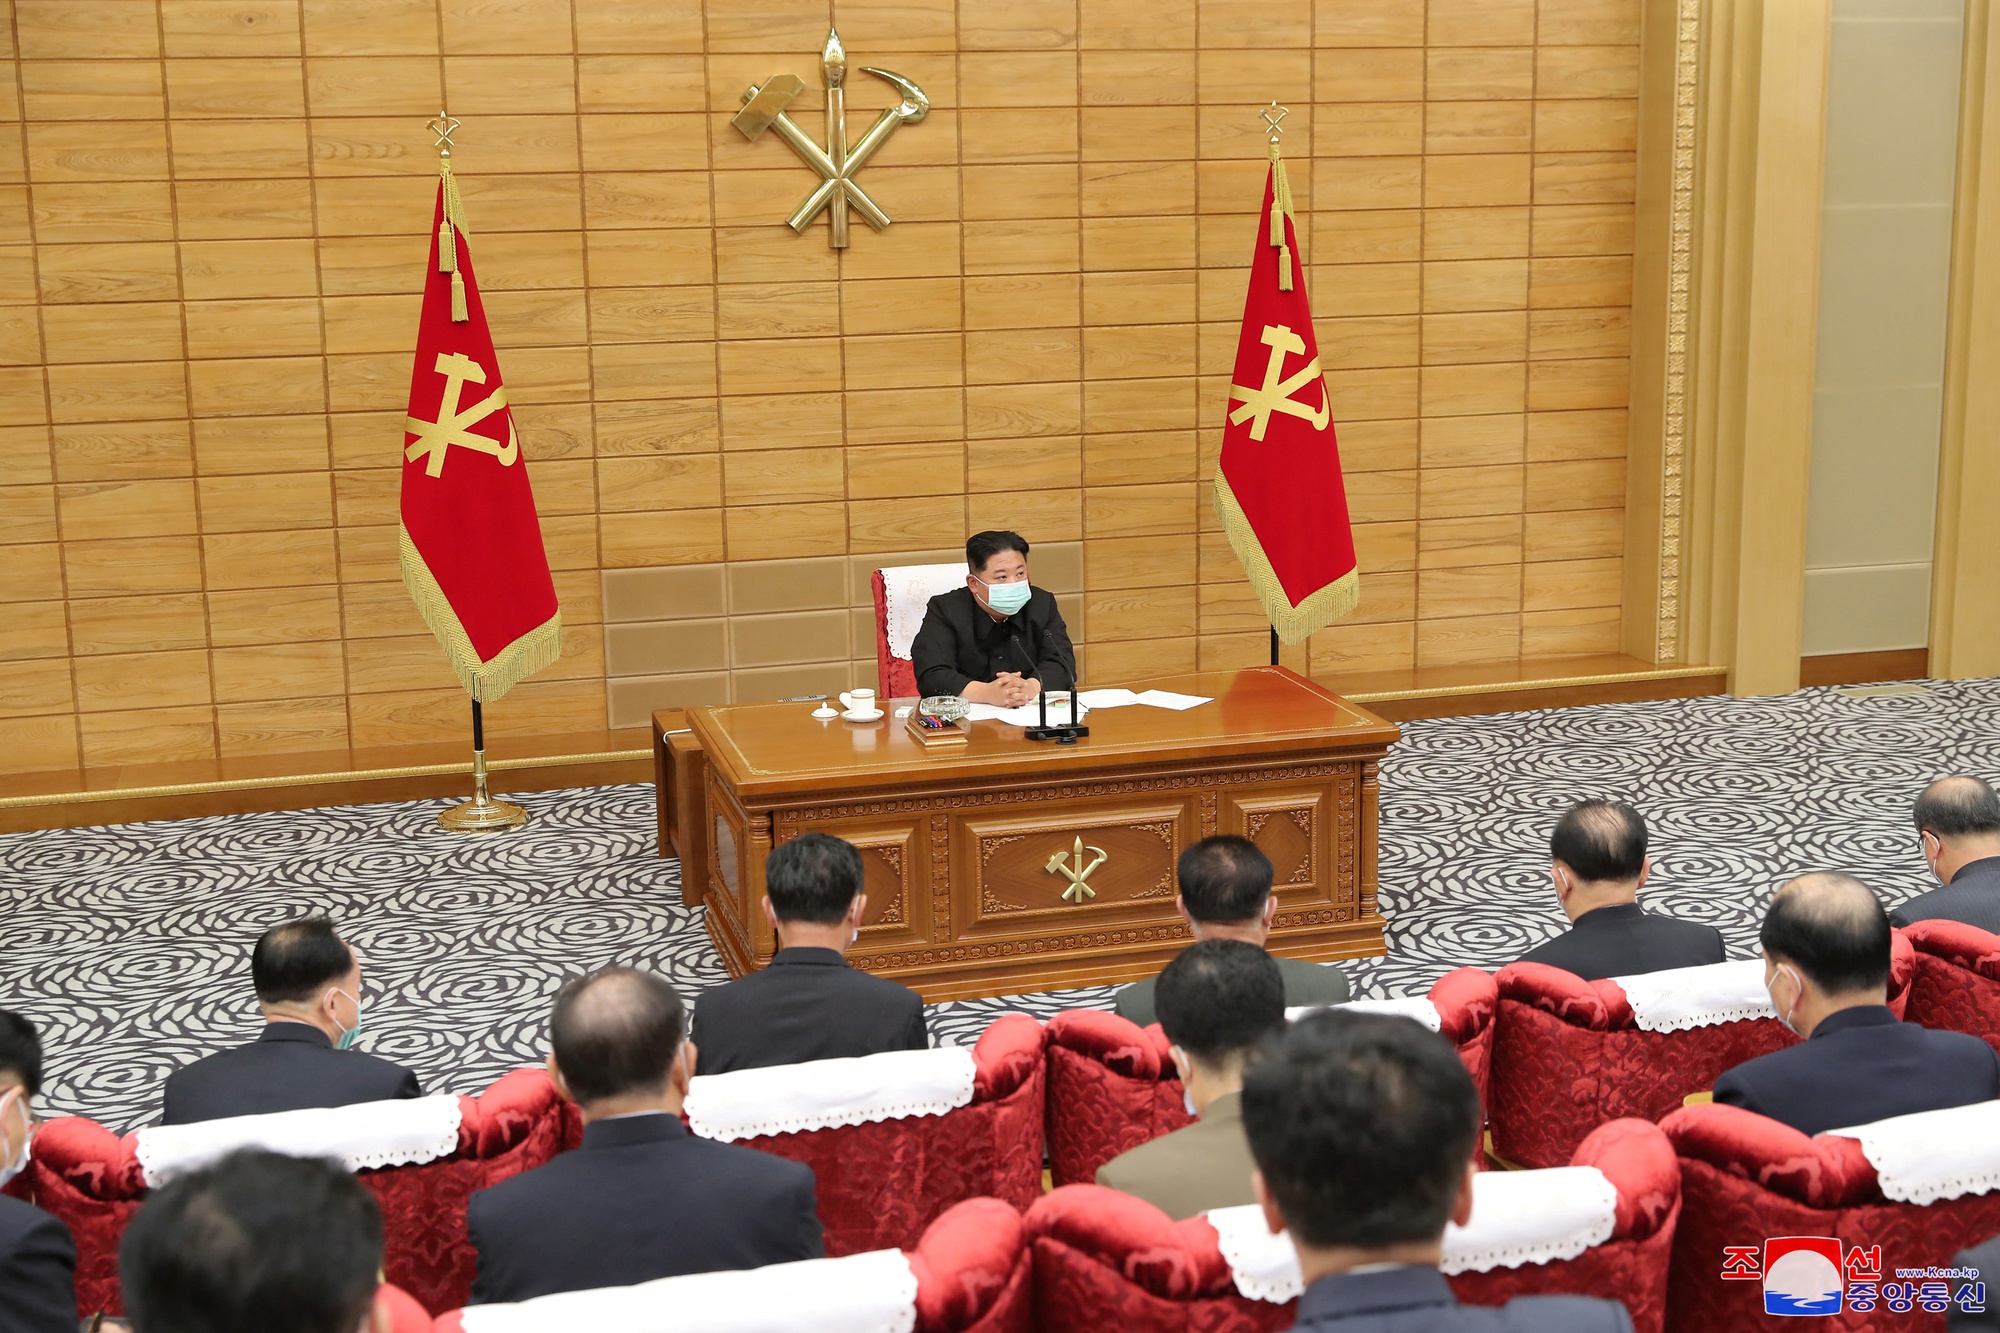 North Korea manages to deal with Covid-19, Shanghai reopens - Photo 1.